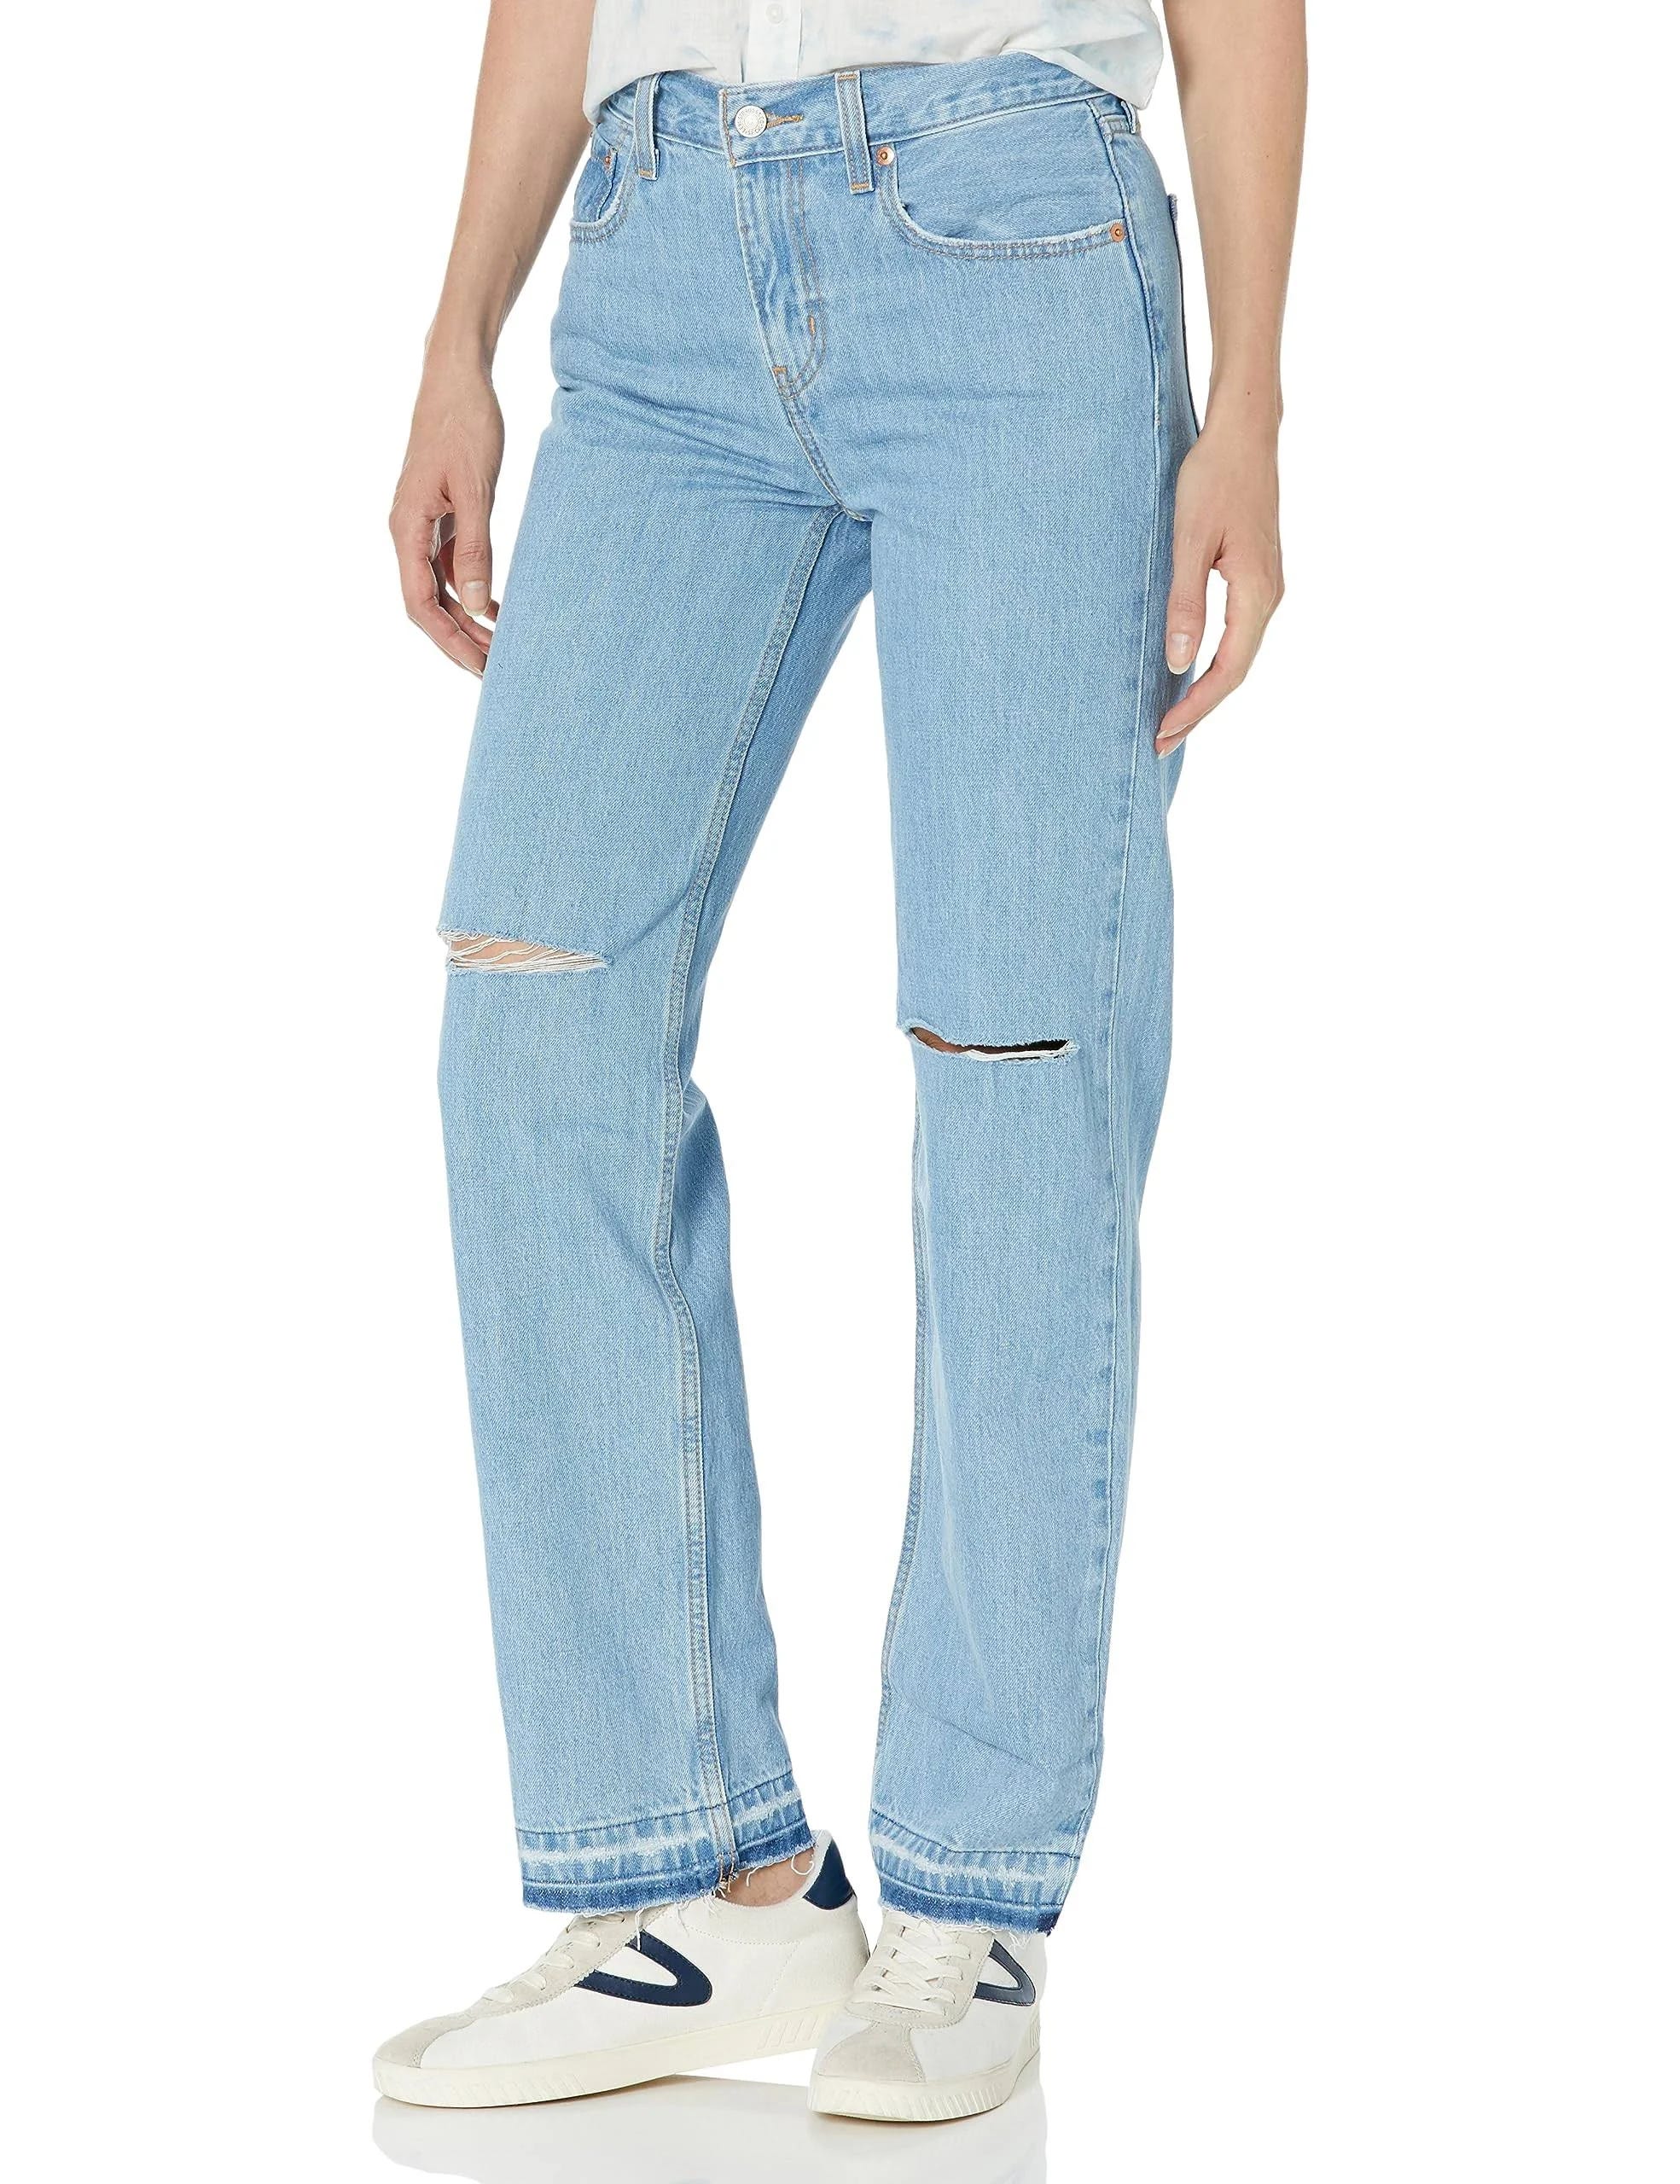 Vintage-Inspired Low Rise Jeans for Women | Image